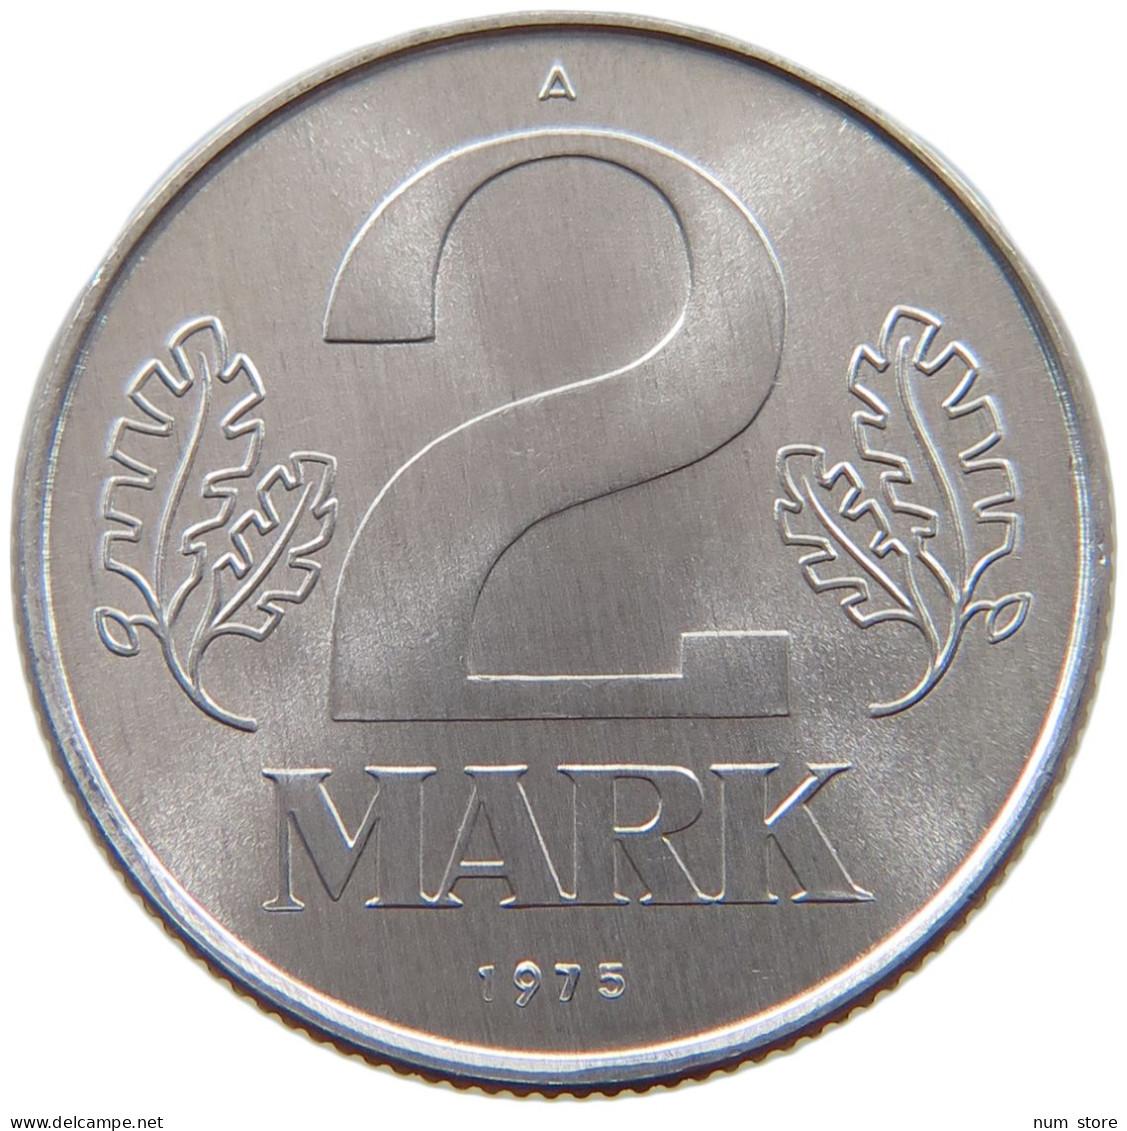 GERMANY DDR 2 MARK 1975 TOP #a076 0247 - 2 Mark